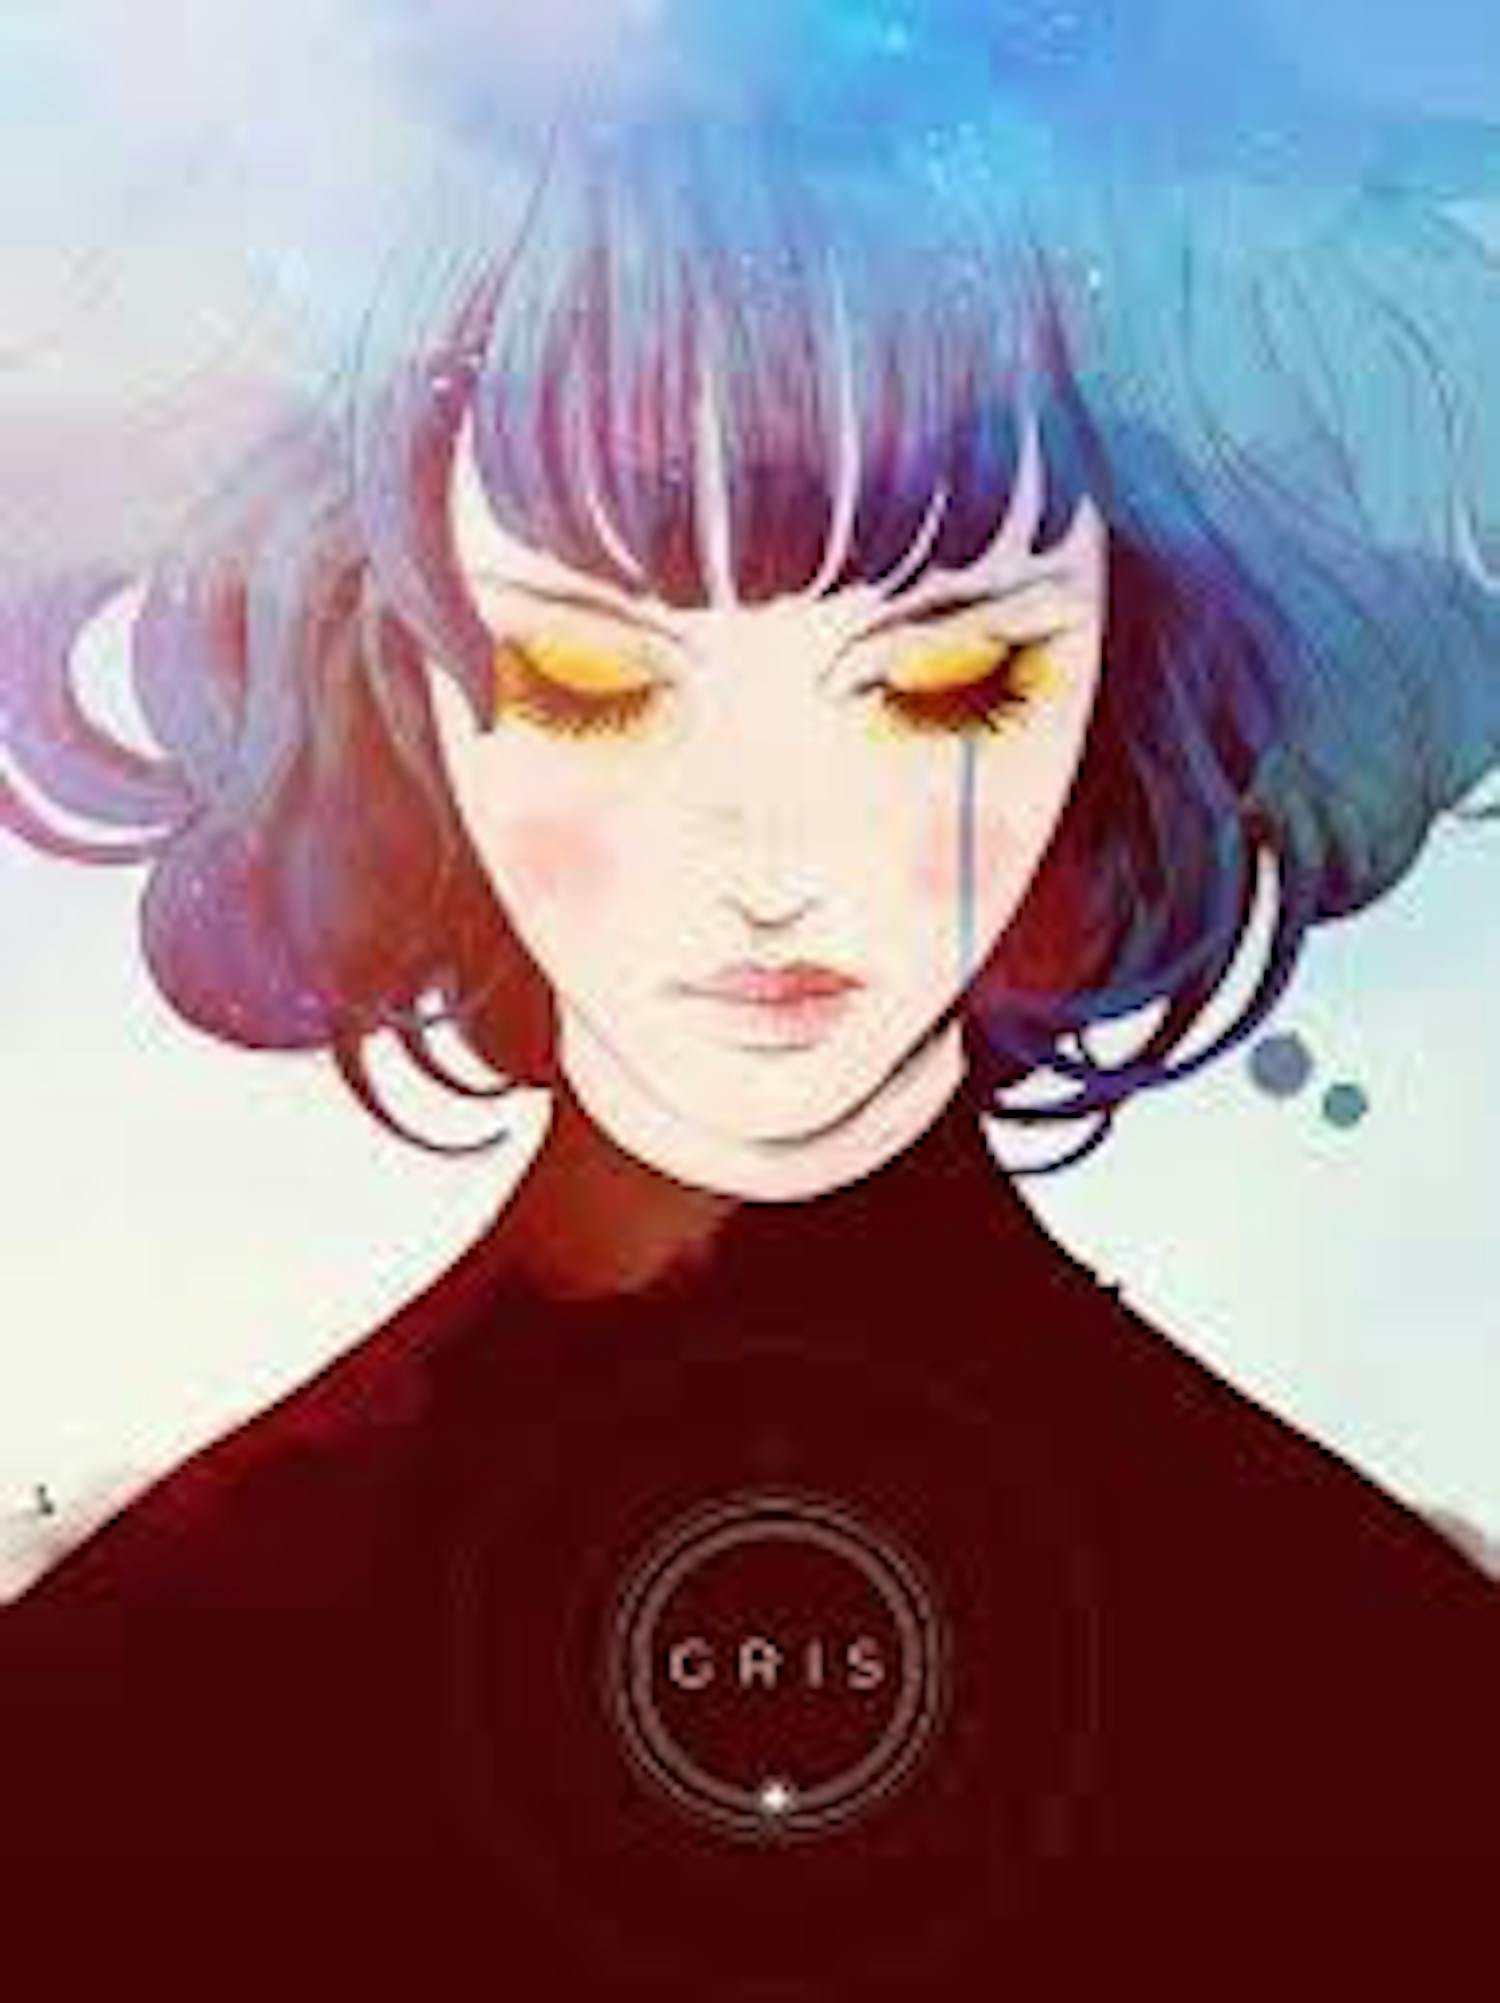 Gris, our third favorite Indie game of 2018, allows players dive into a world of living illustration.